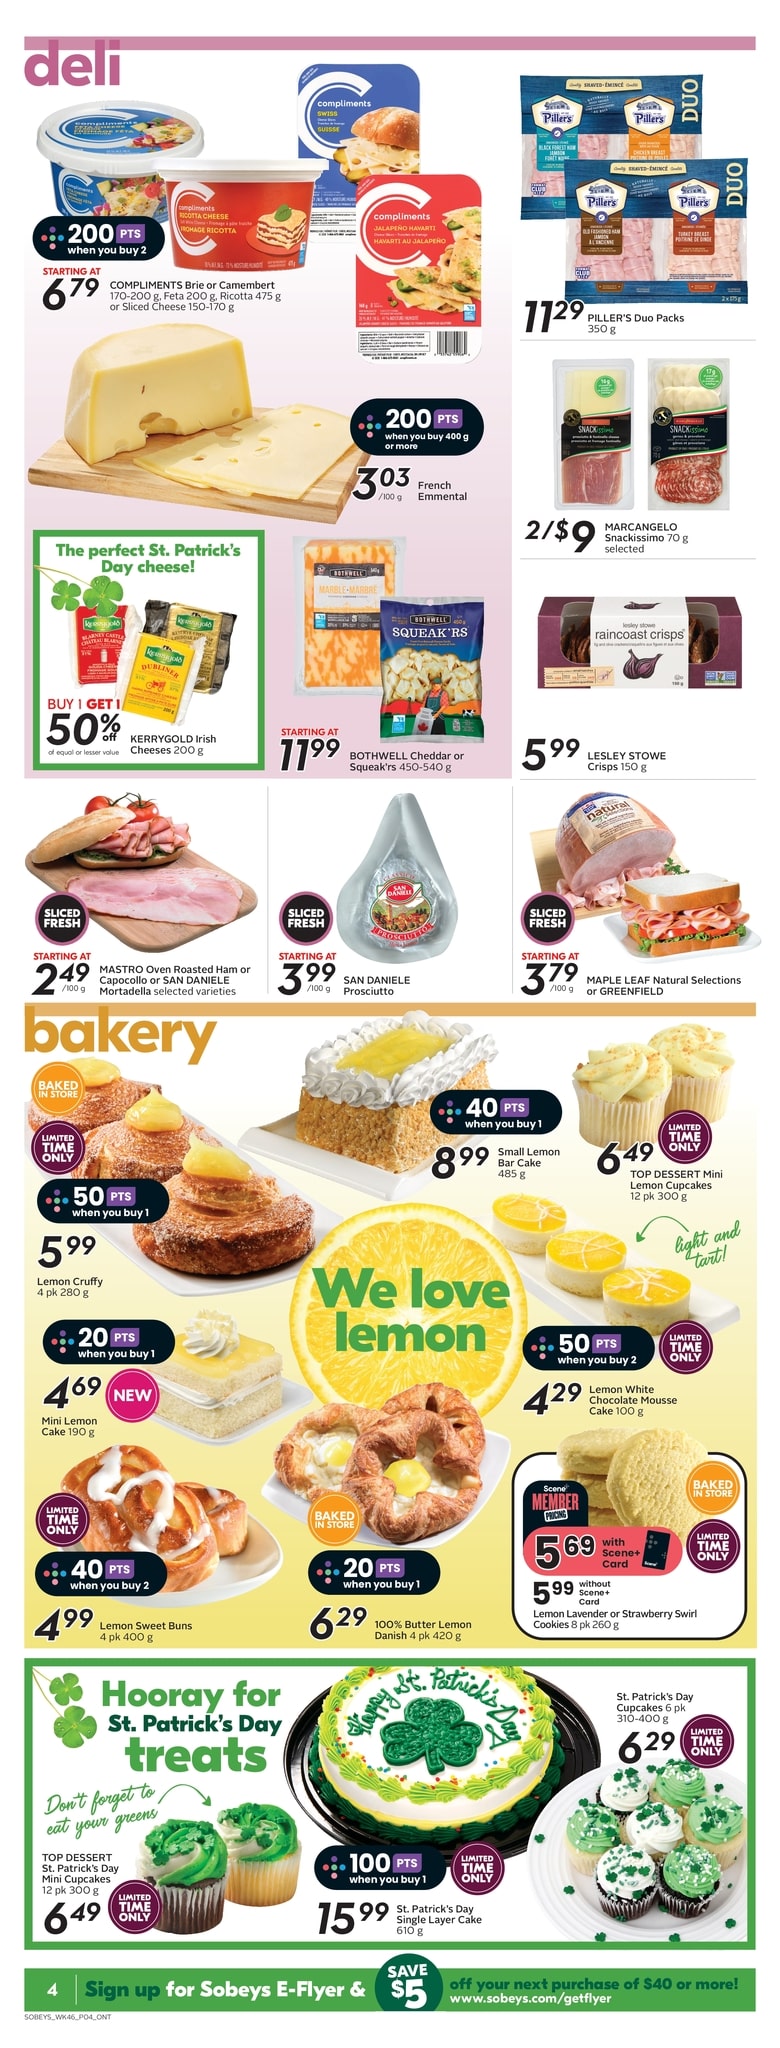 Sobeys - Weekly Flyer Specials - Page 7